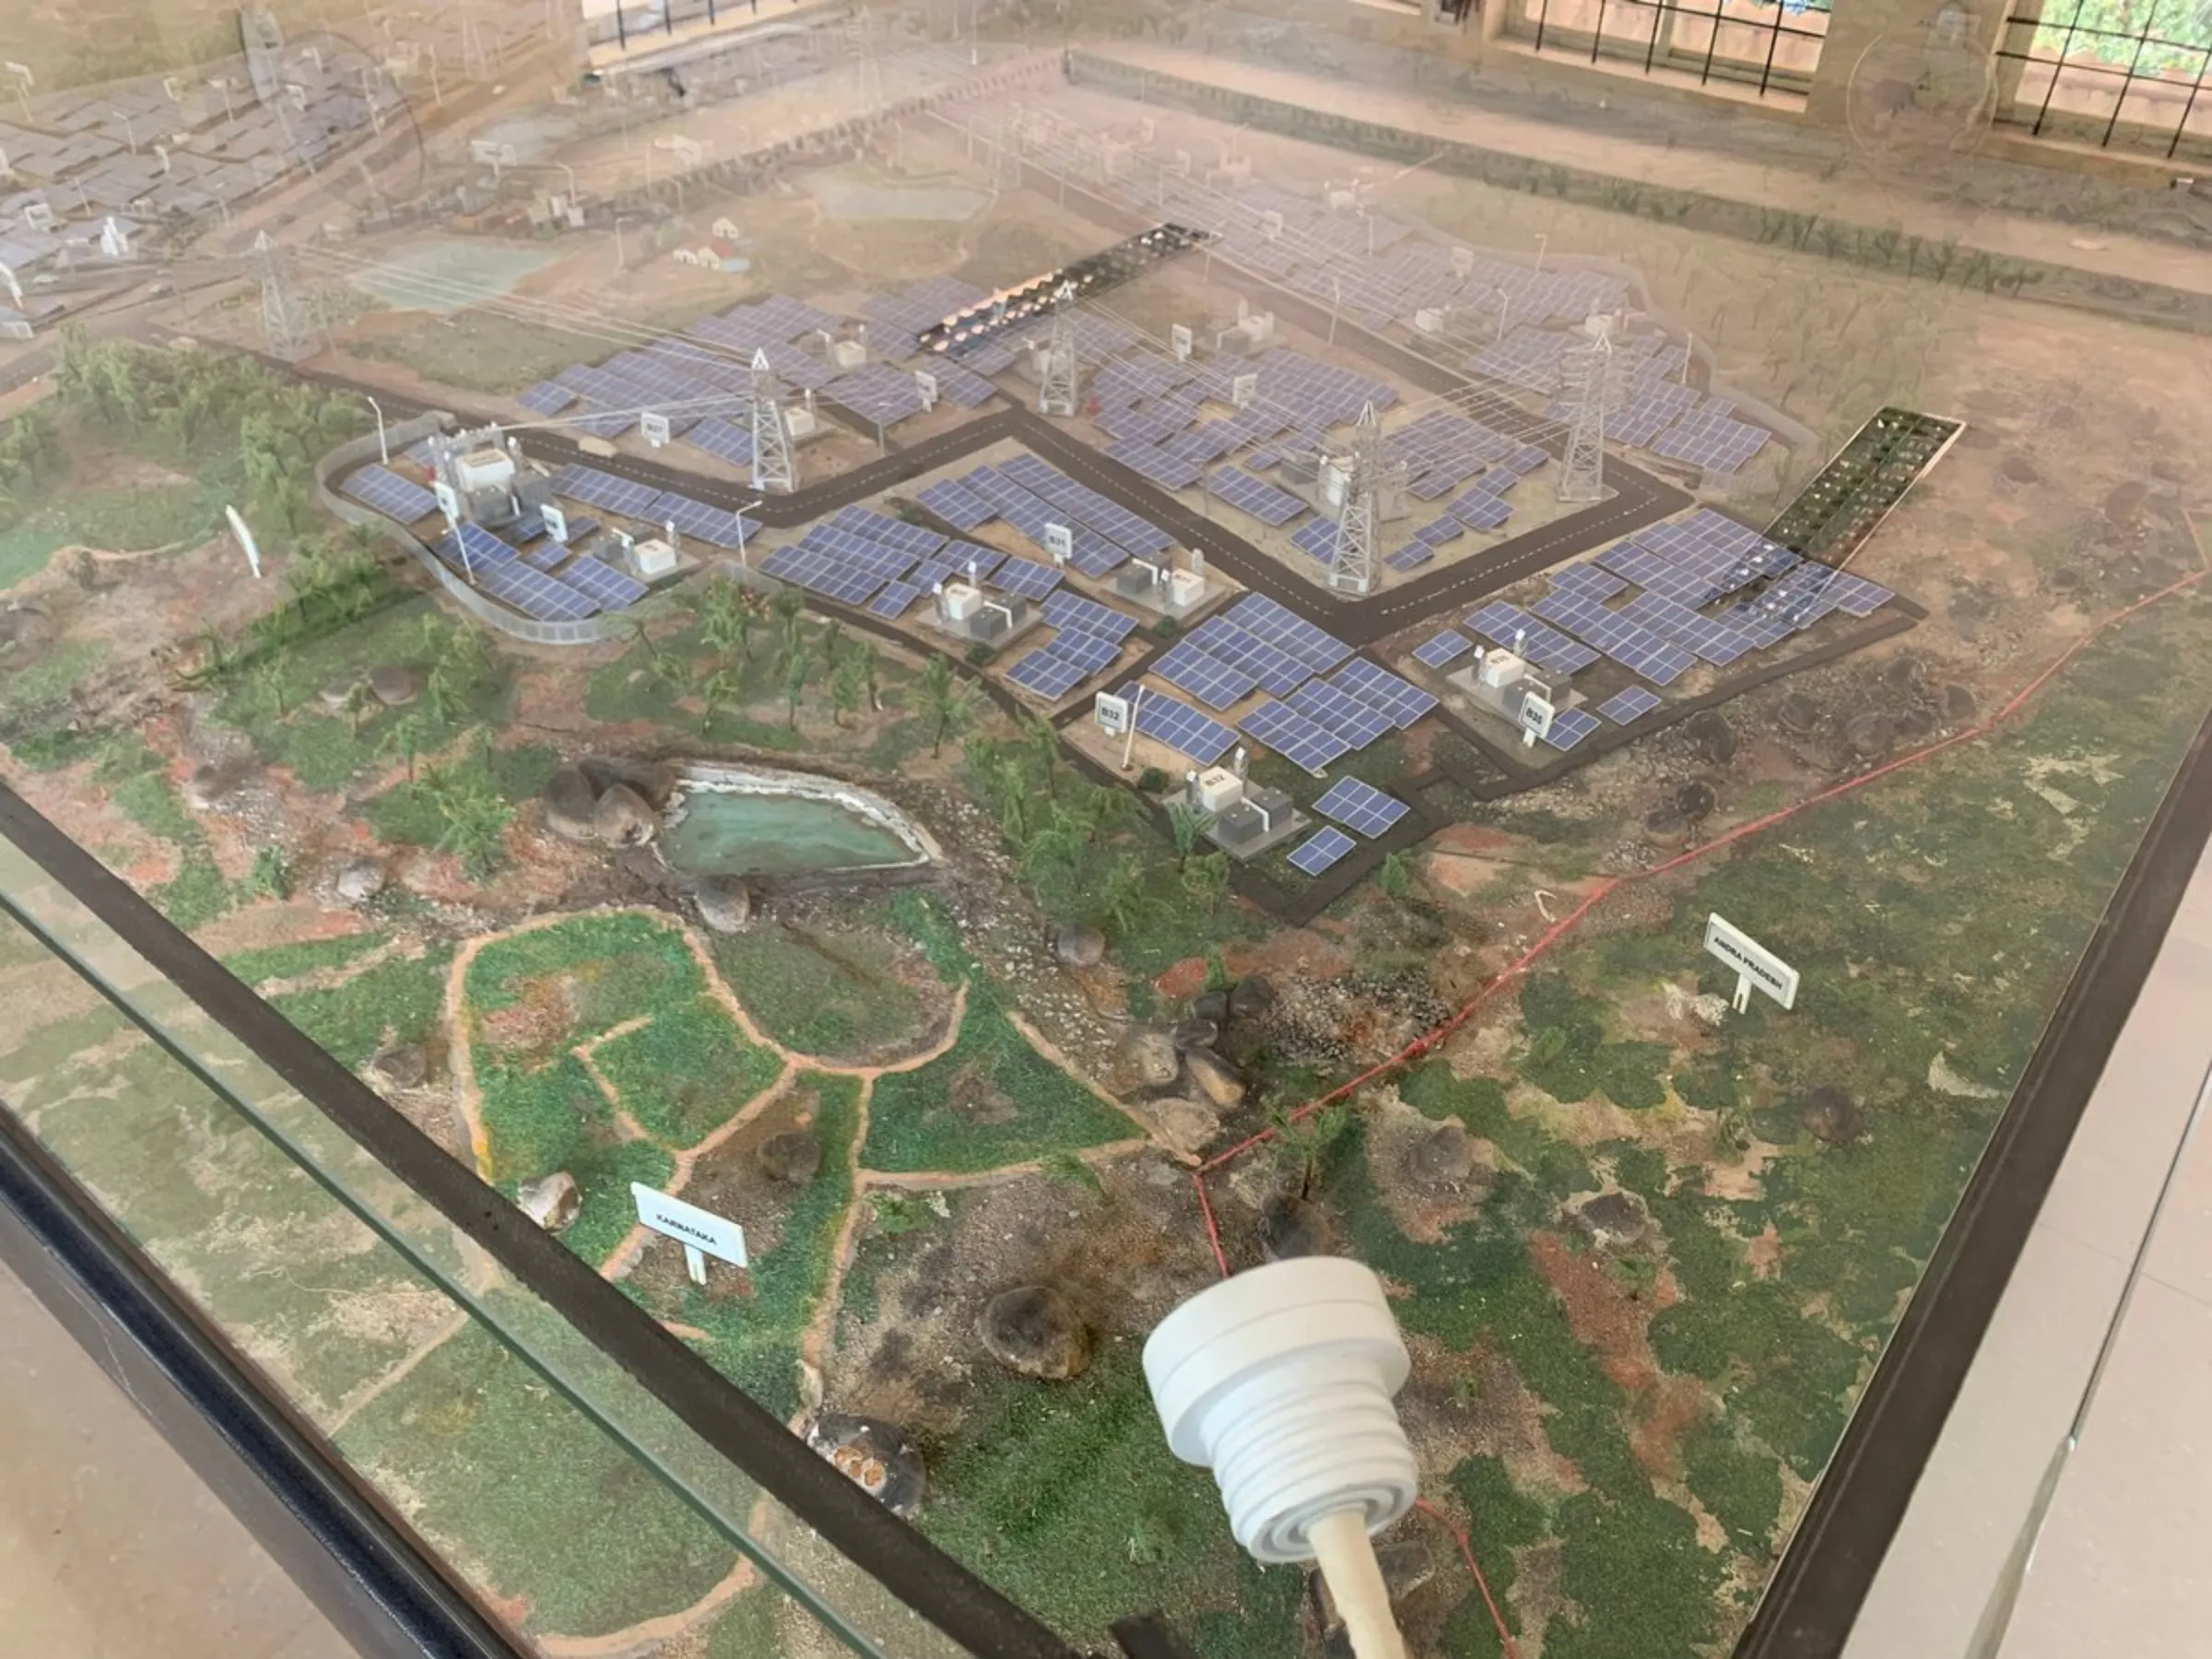 A model of the Shakti Sthala solar park on display at the office of the Karnataka State Power Development Corporation Limited in Pavagada, India, December 27, 2021